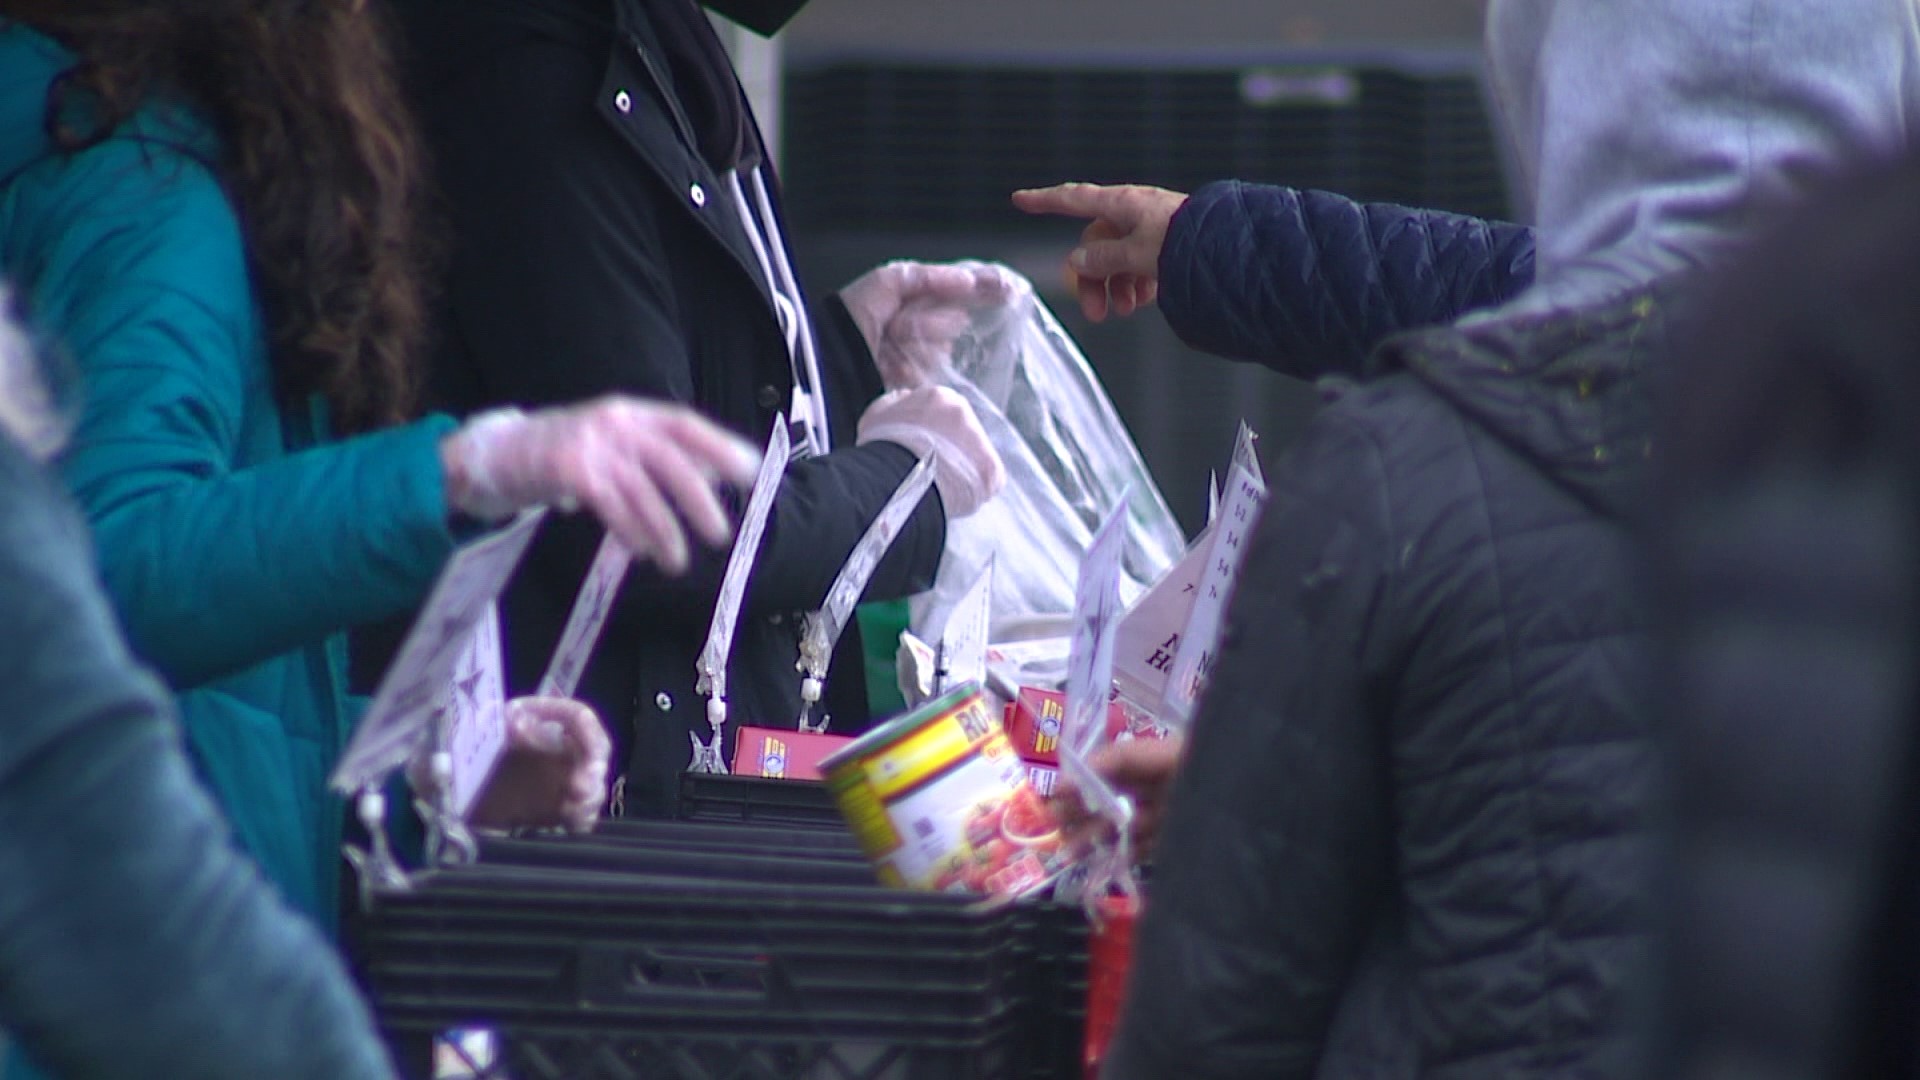 The executive director of North Helpline food banks says their two locations serve 1,600 people on average each week.